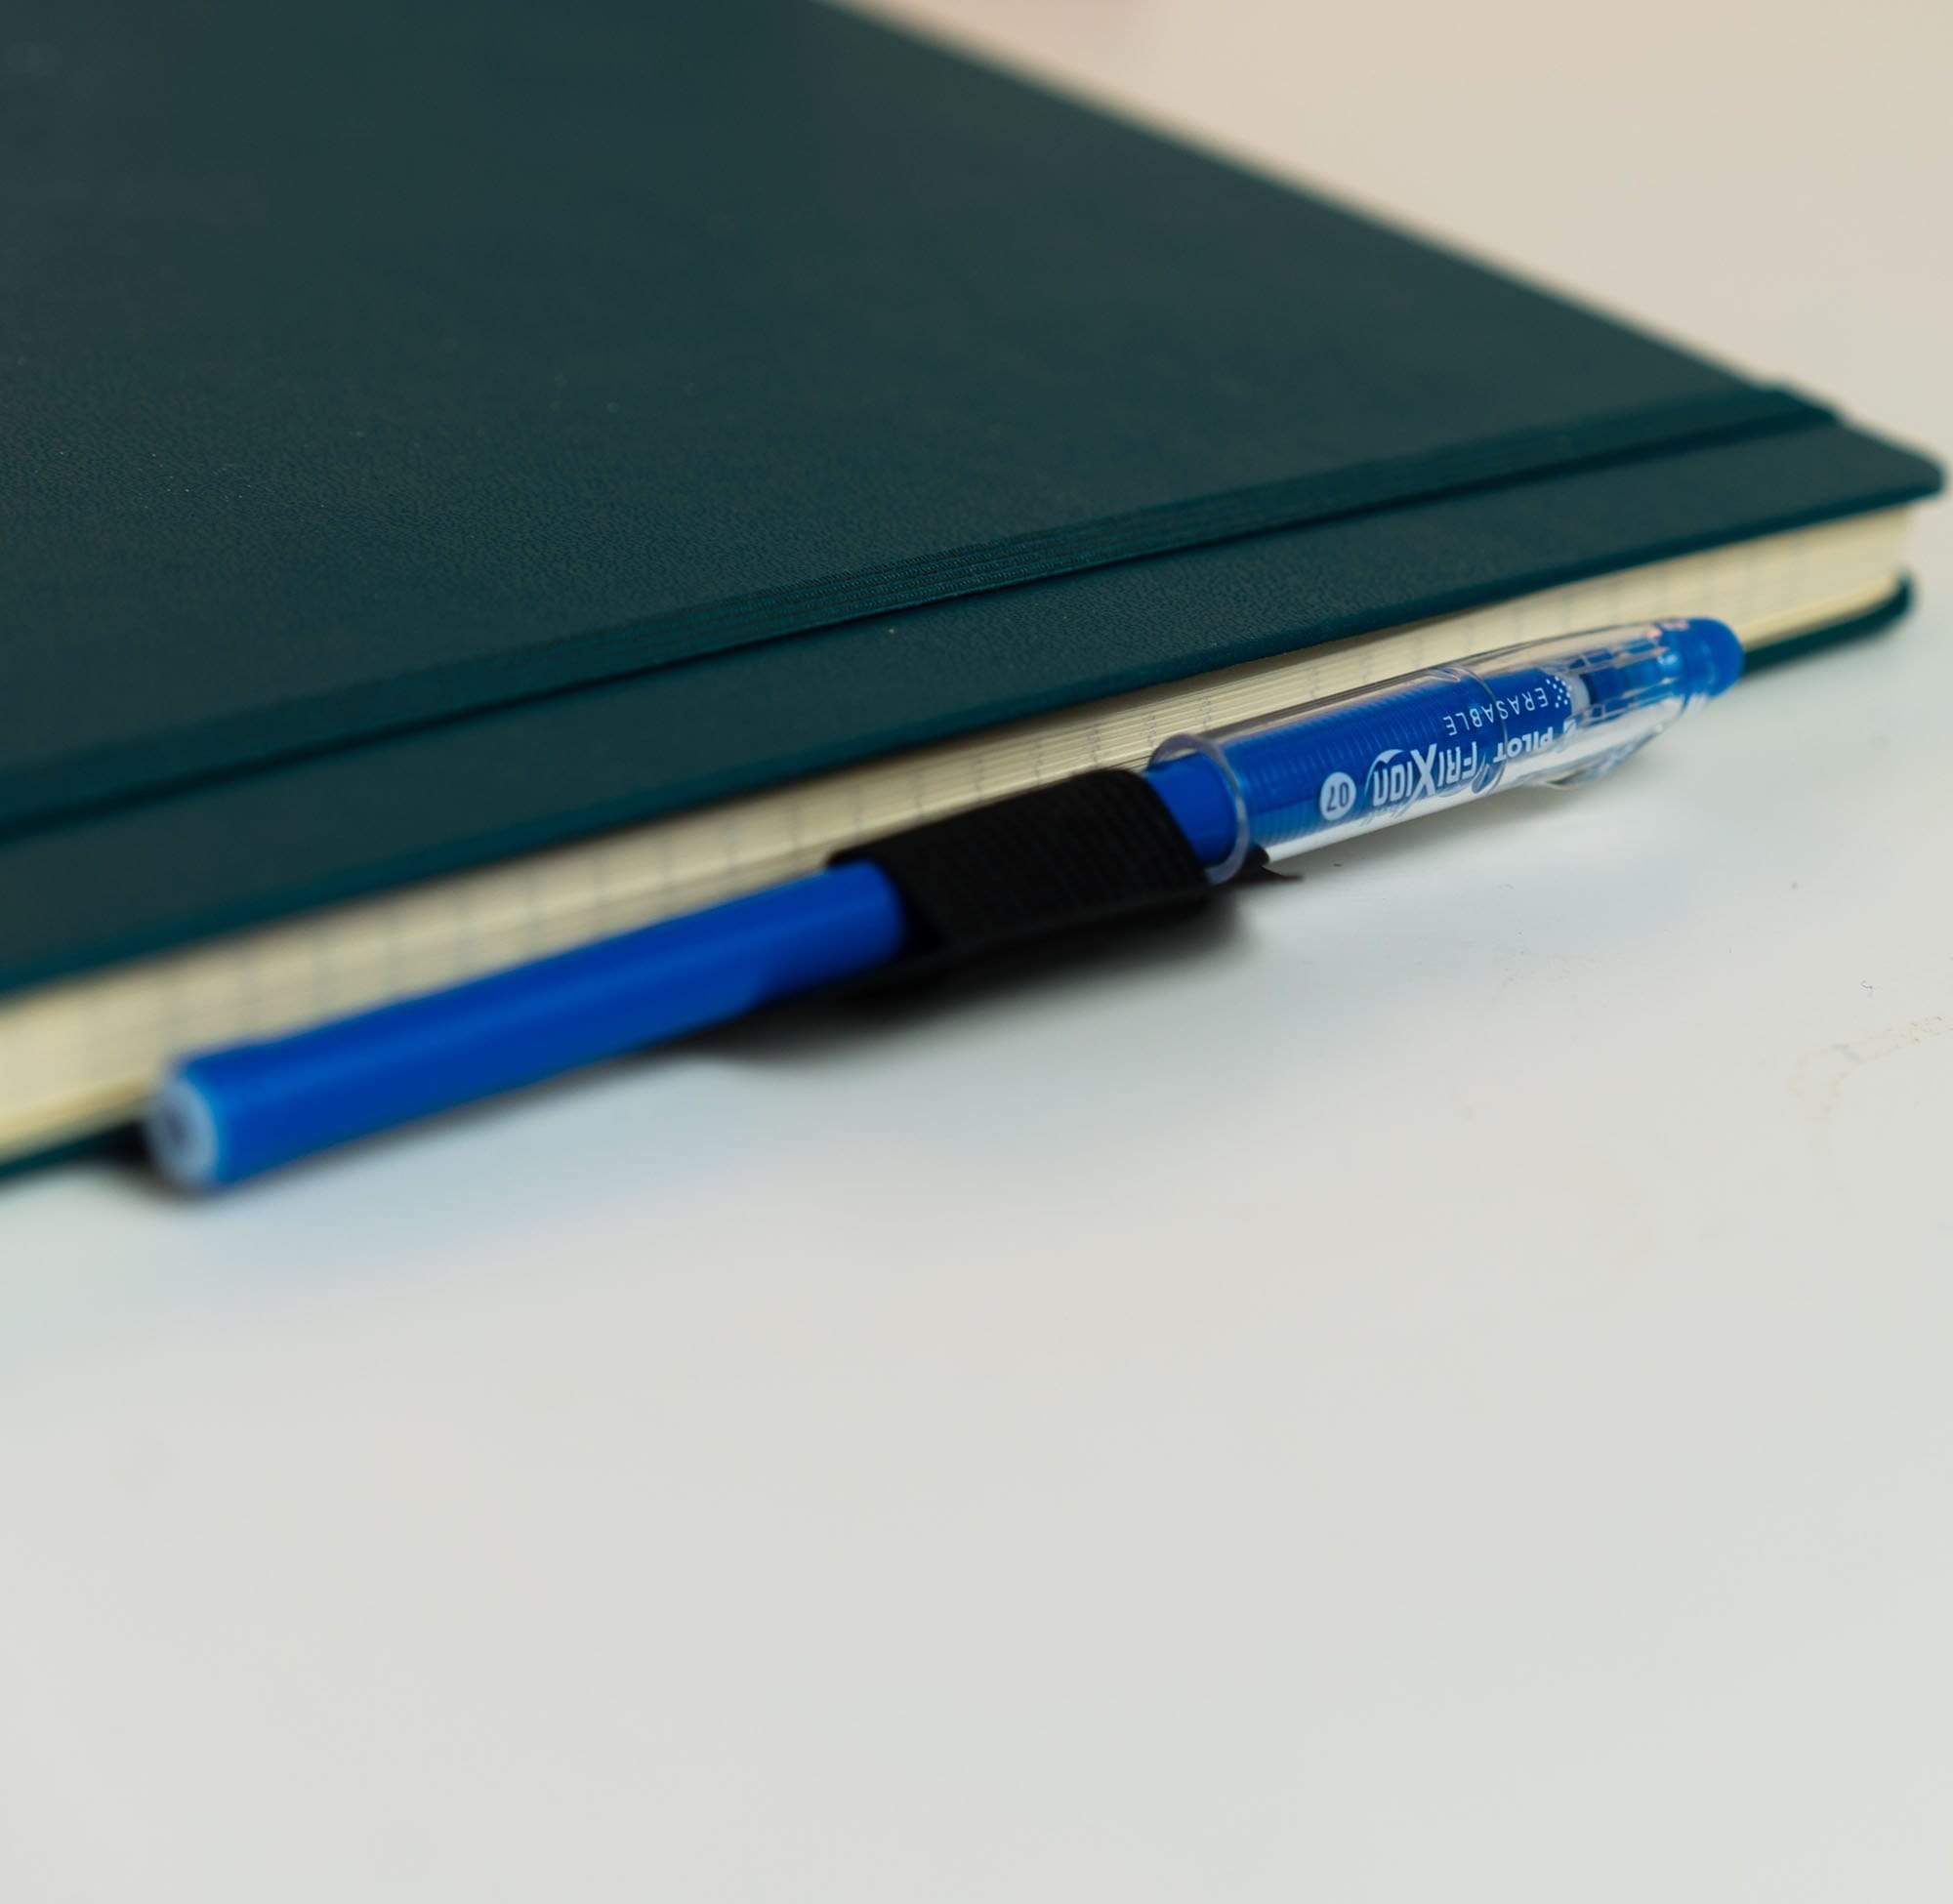 Rocketbook pen station attached to a notebook